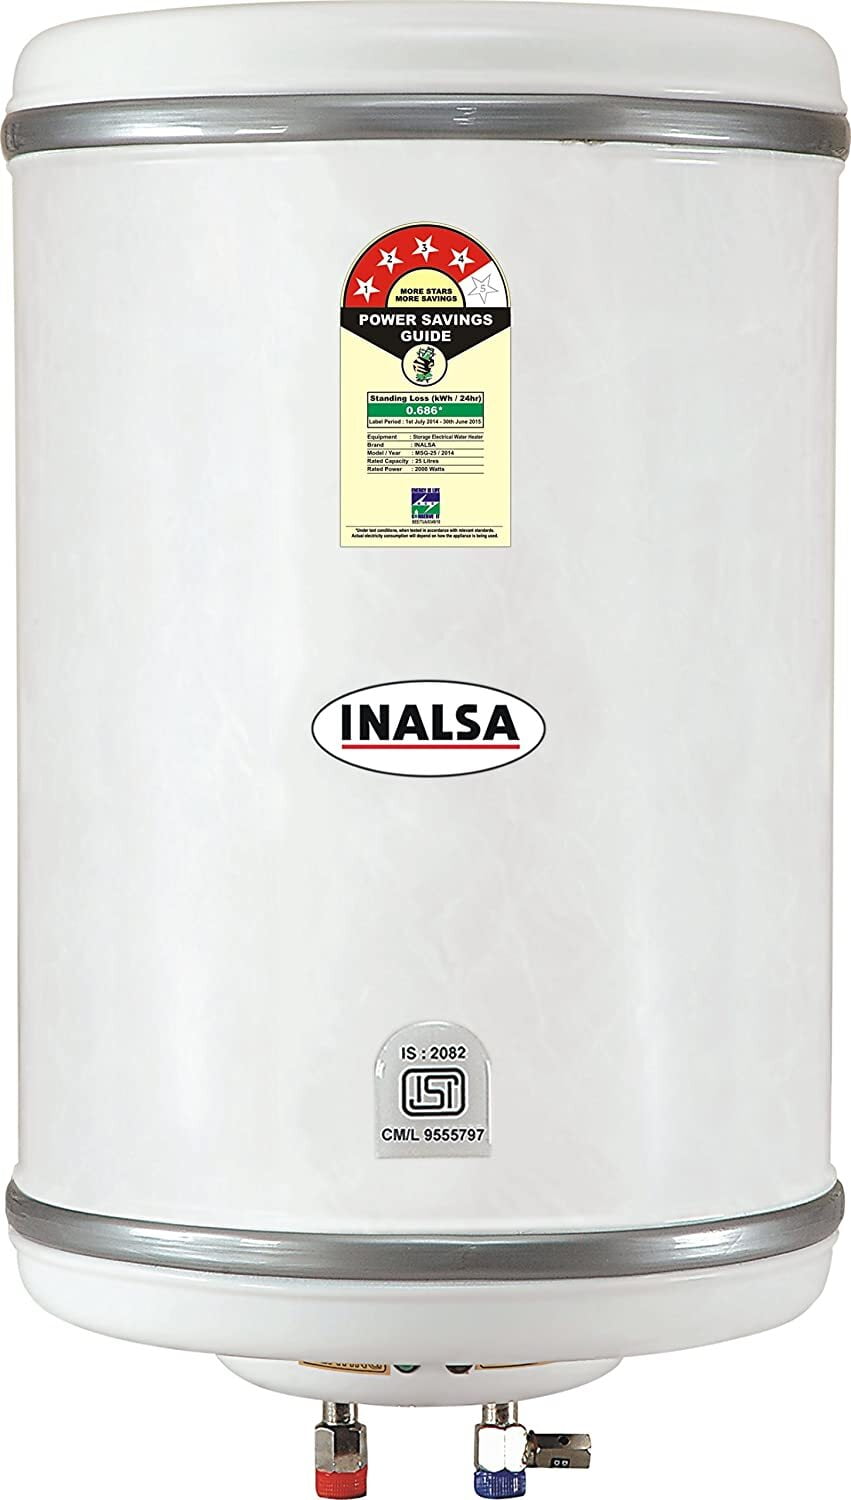 Inalsa Msg Storage Water Heater On Dillimall.Com